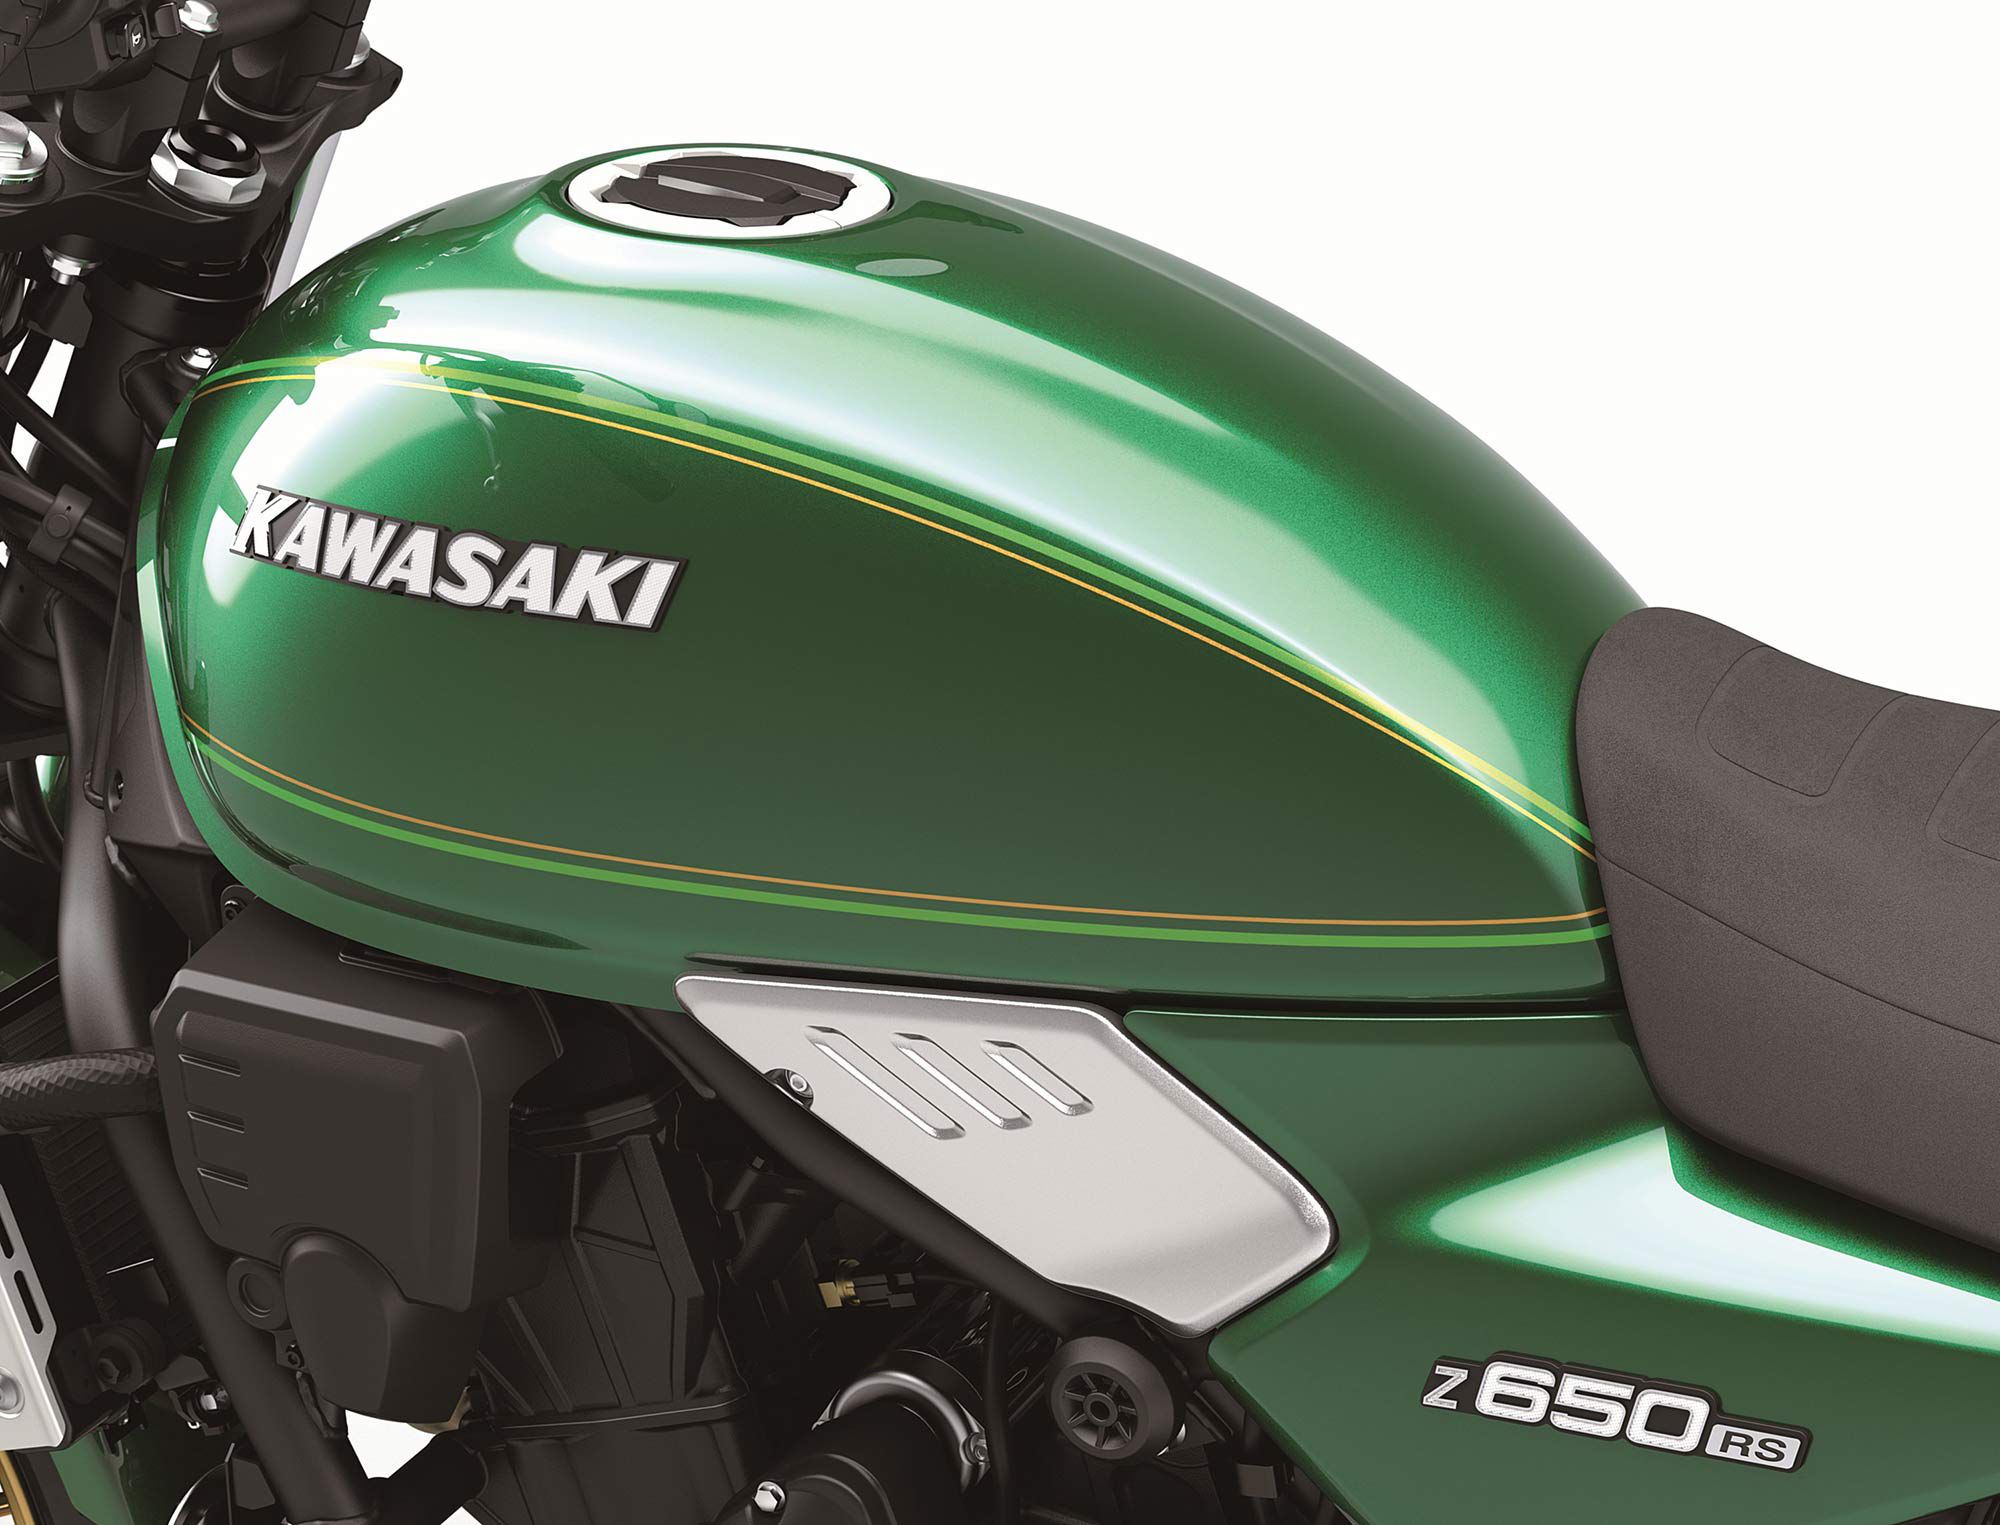 Kawasaki made the fuel tank slimmer so the cockpit could be more approachable to a broader range of riders.